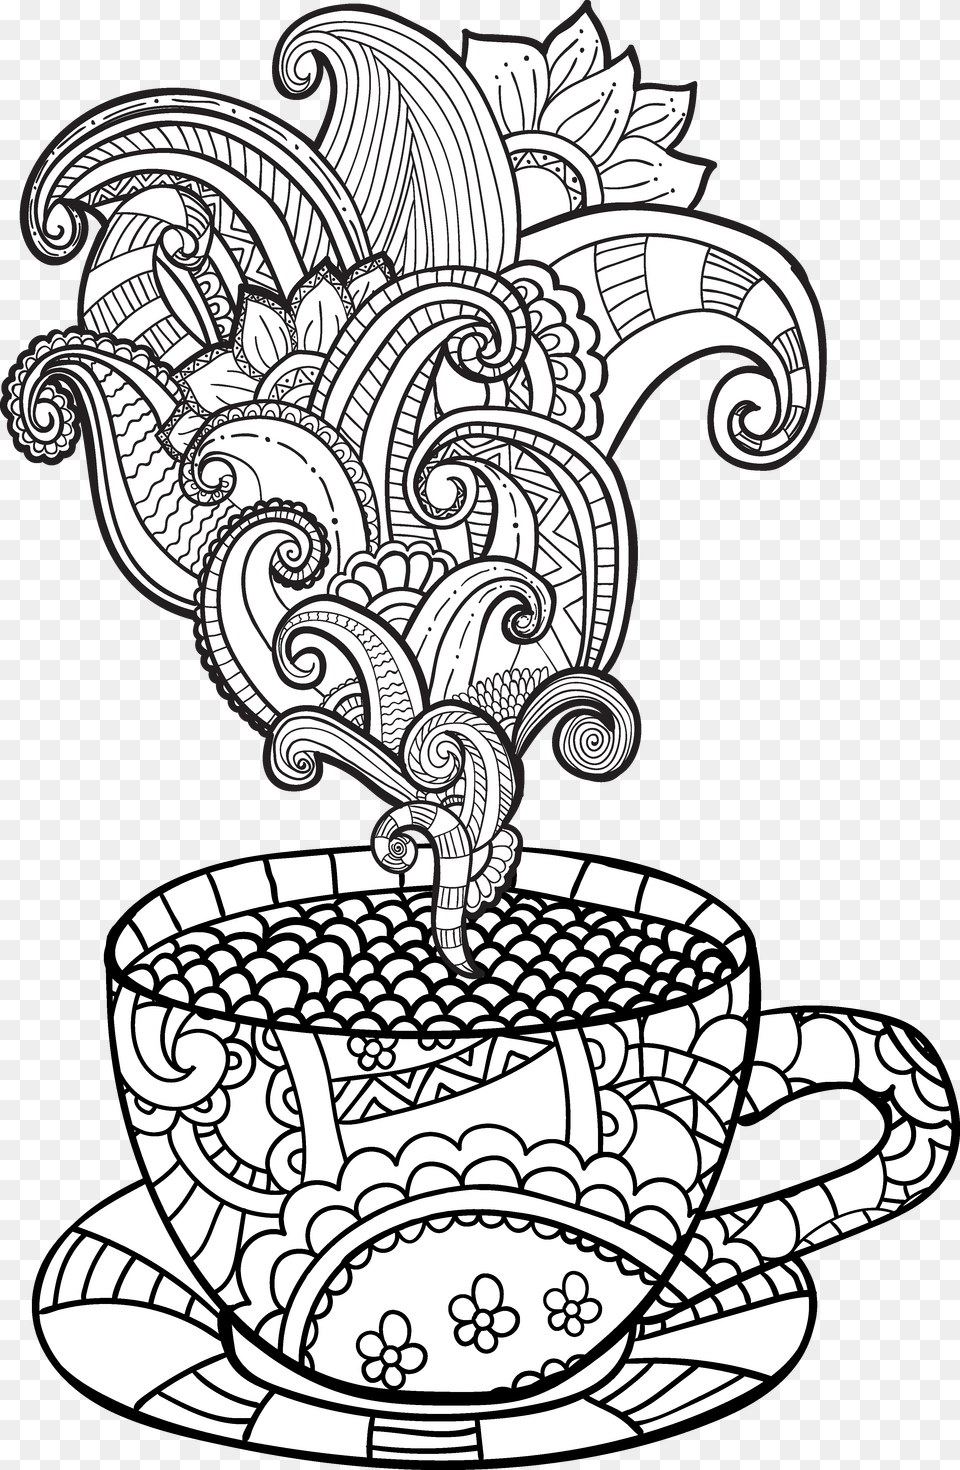 View Larger Coffee Cup Coloring, Art, Pottery, Bulldozer, Machine Png Image